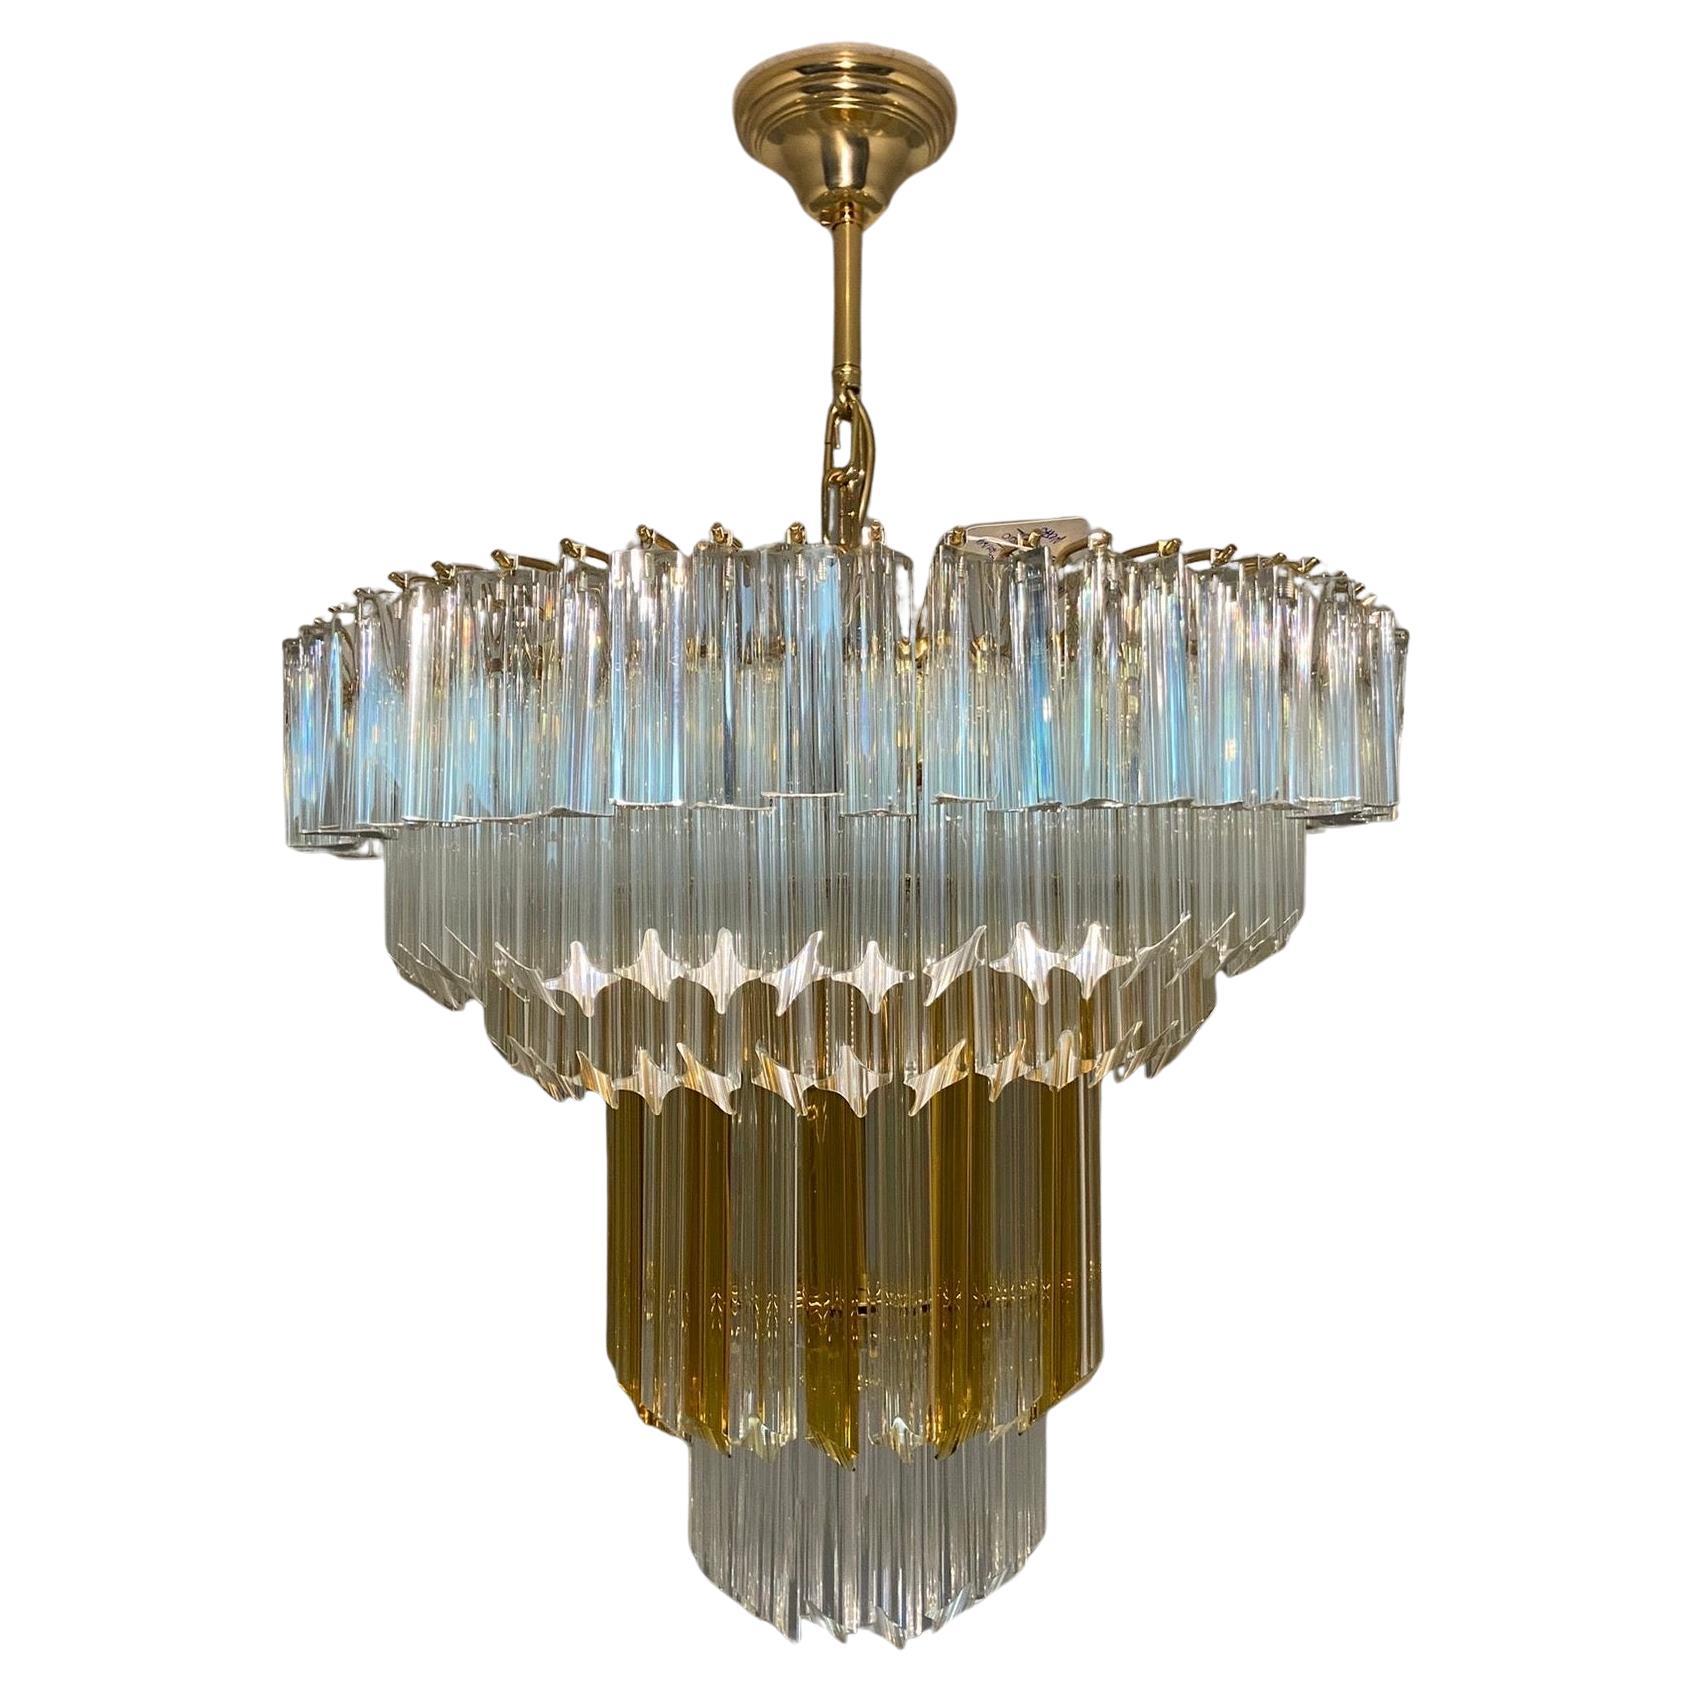 A superb Murano Glass triedri round chandelier designed and manufactured in Venice, it's a chandelier bought in a shop that was going out of business, it has never used in a house, the pictures have been made in the shop. High quality of brass and